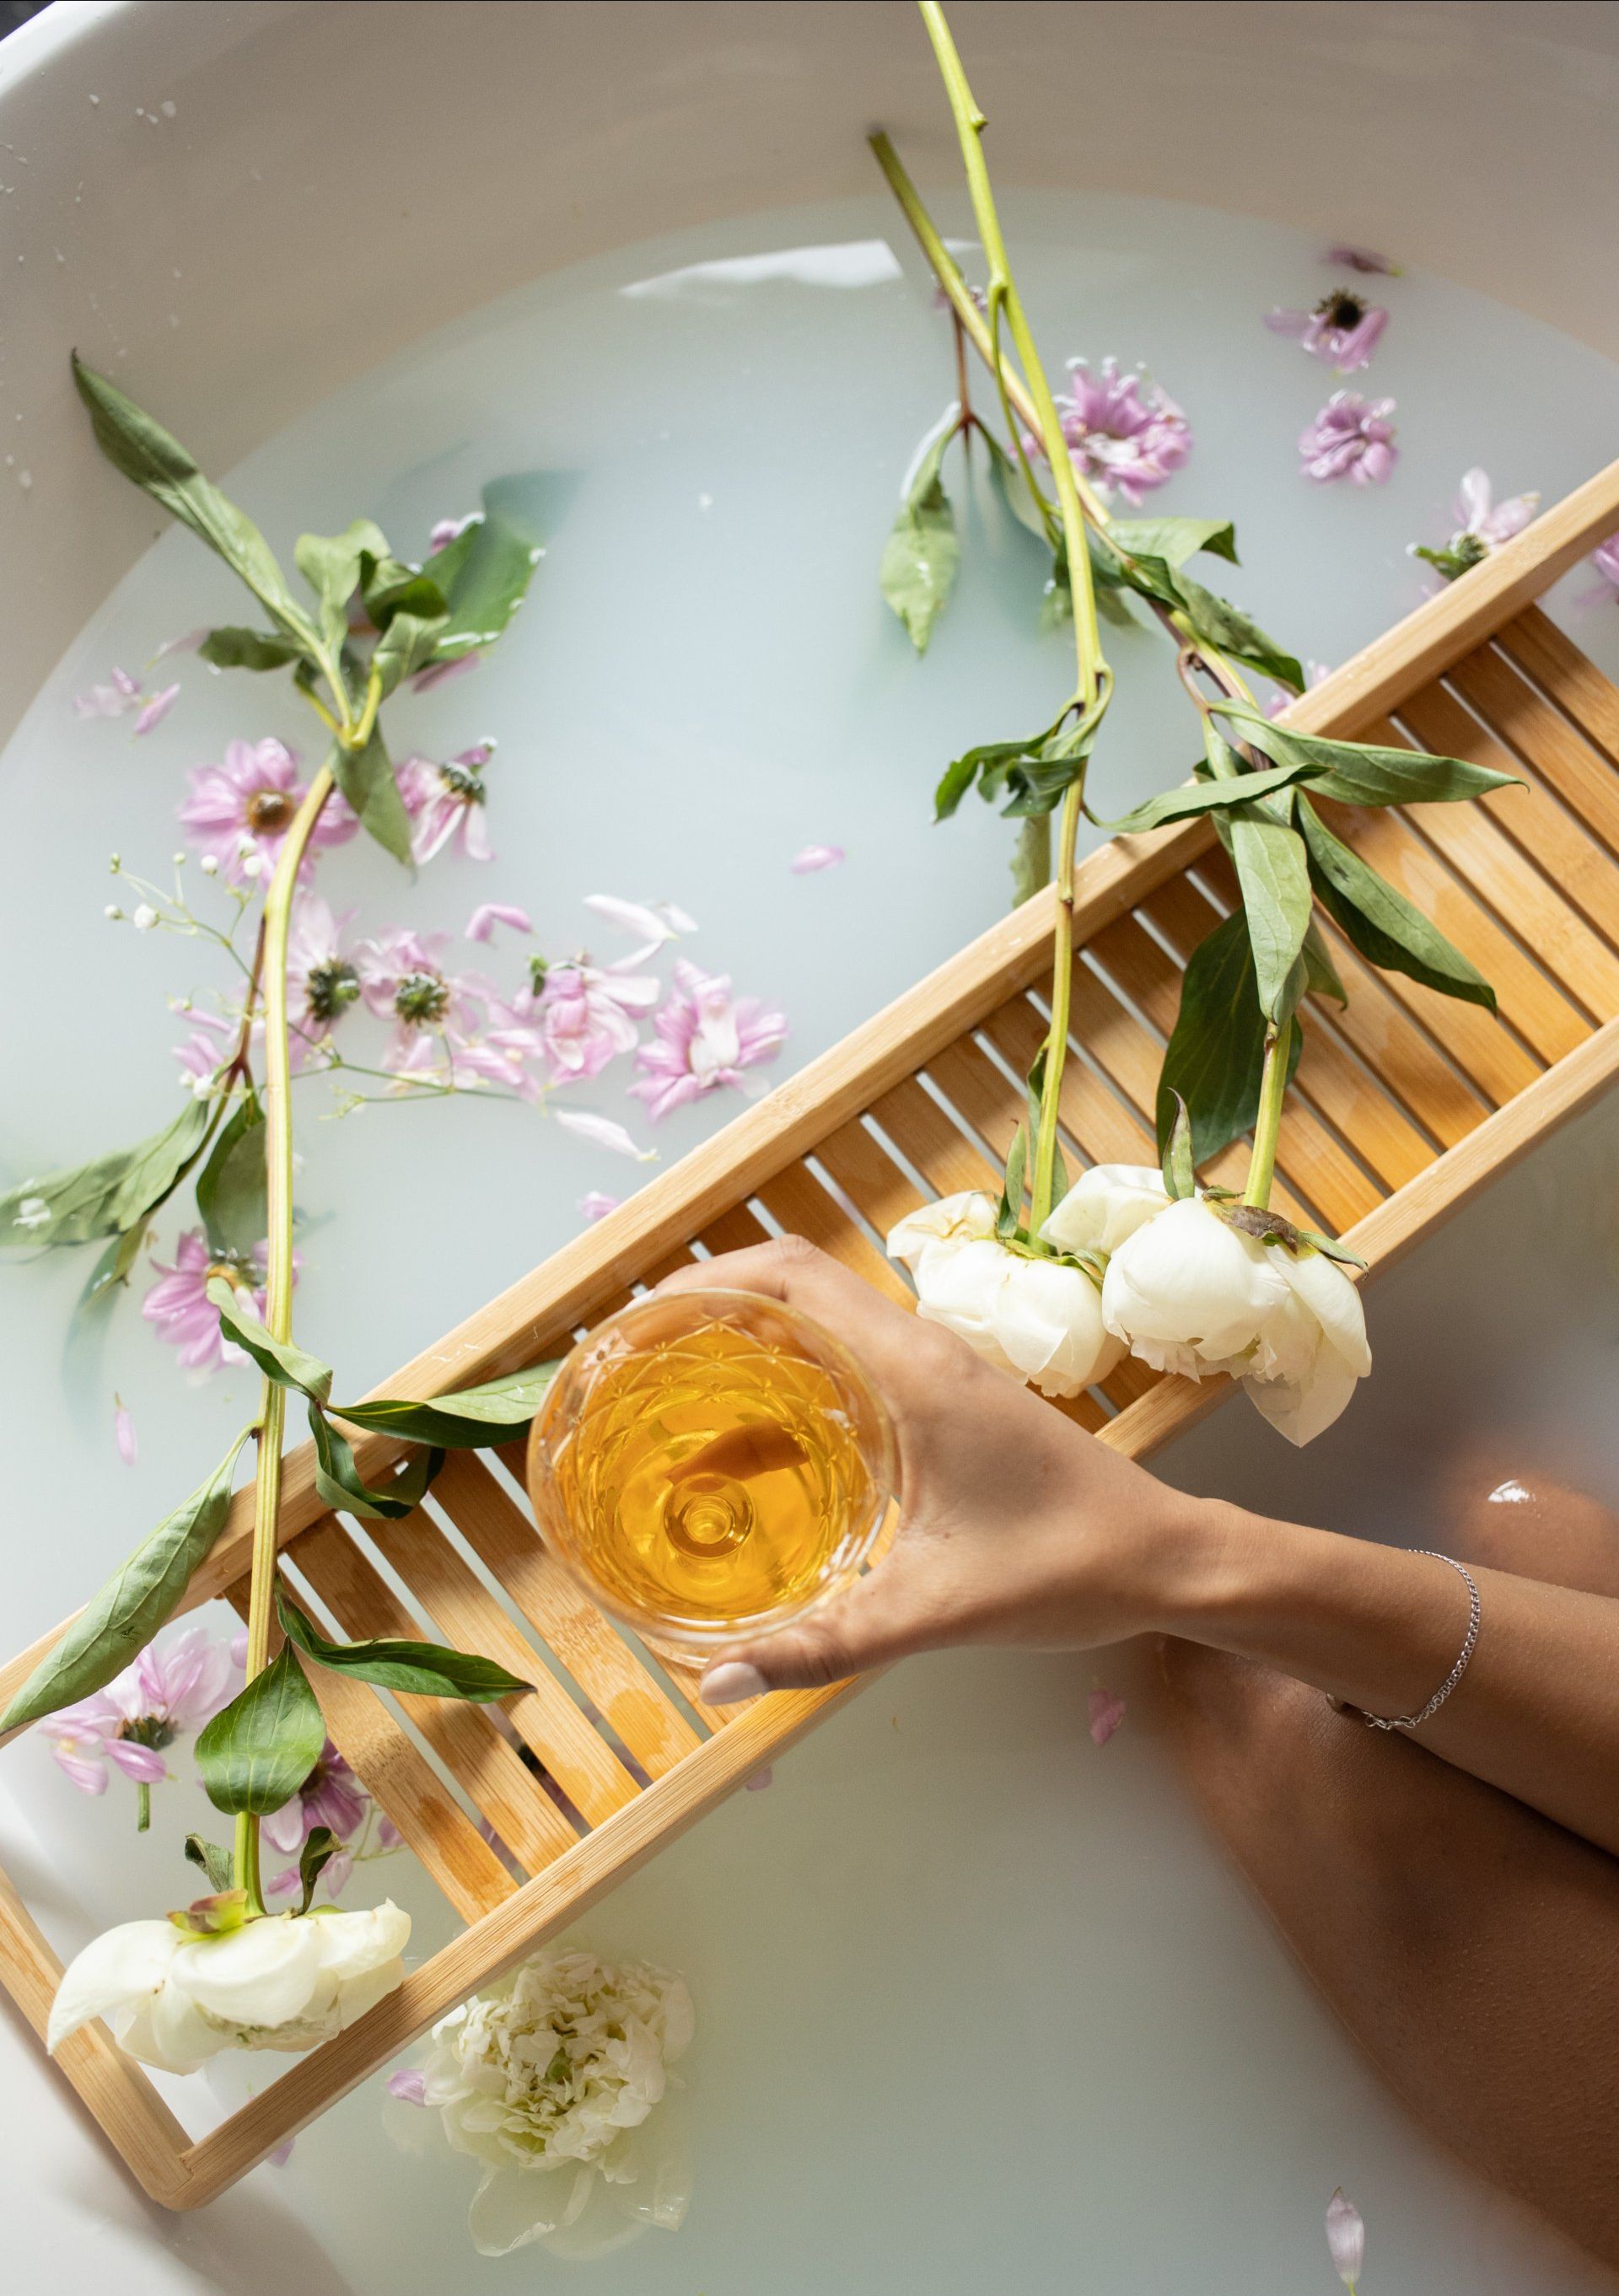 A woman is taking a bath with flowers and a glass of wine.